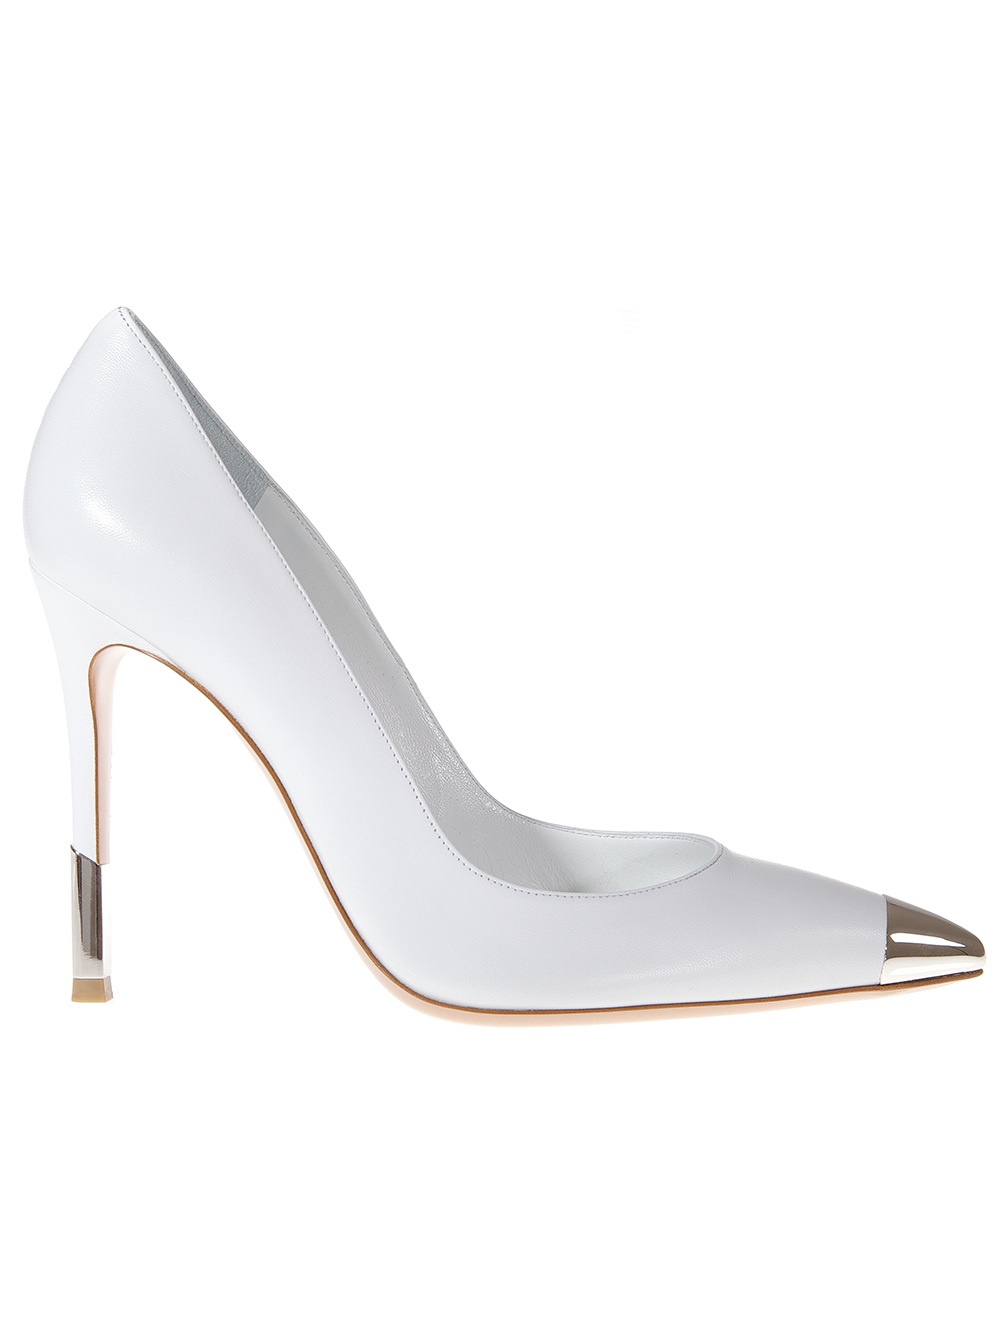 Gianvito rossi Pointed Toe Pump in White | Lyst